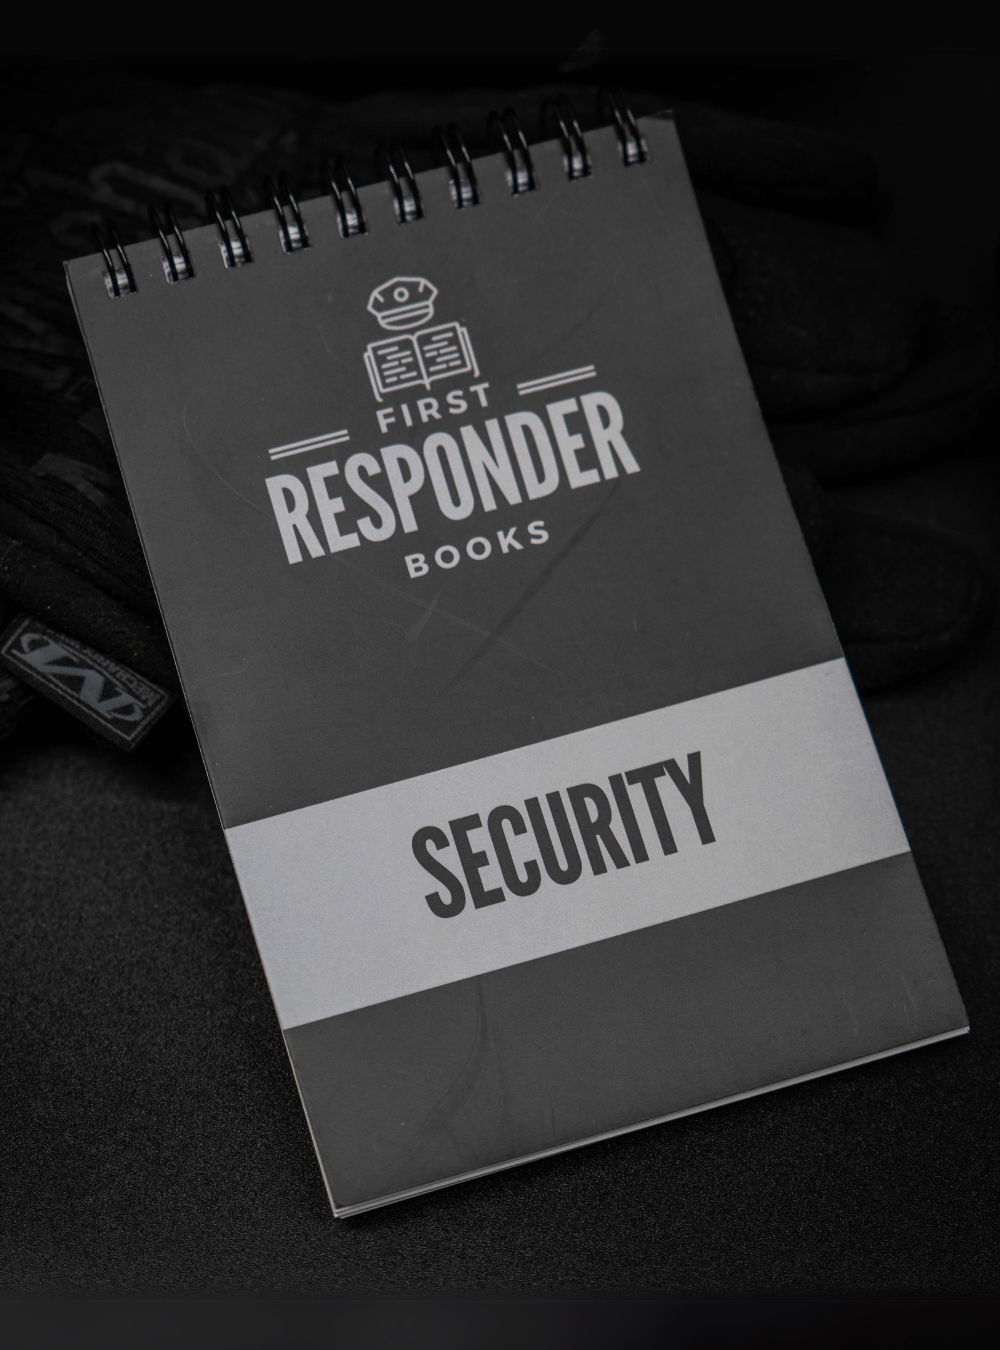 First Responder Books Security Incident Booklet